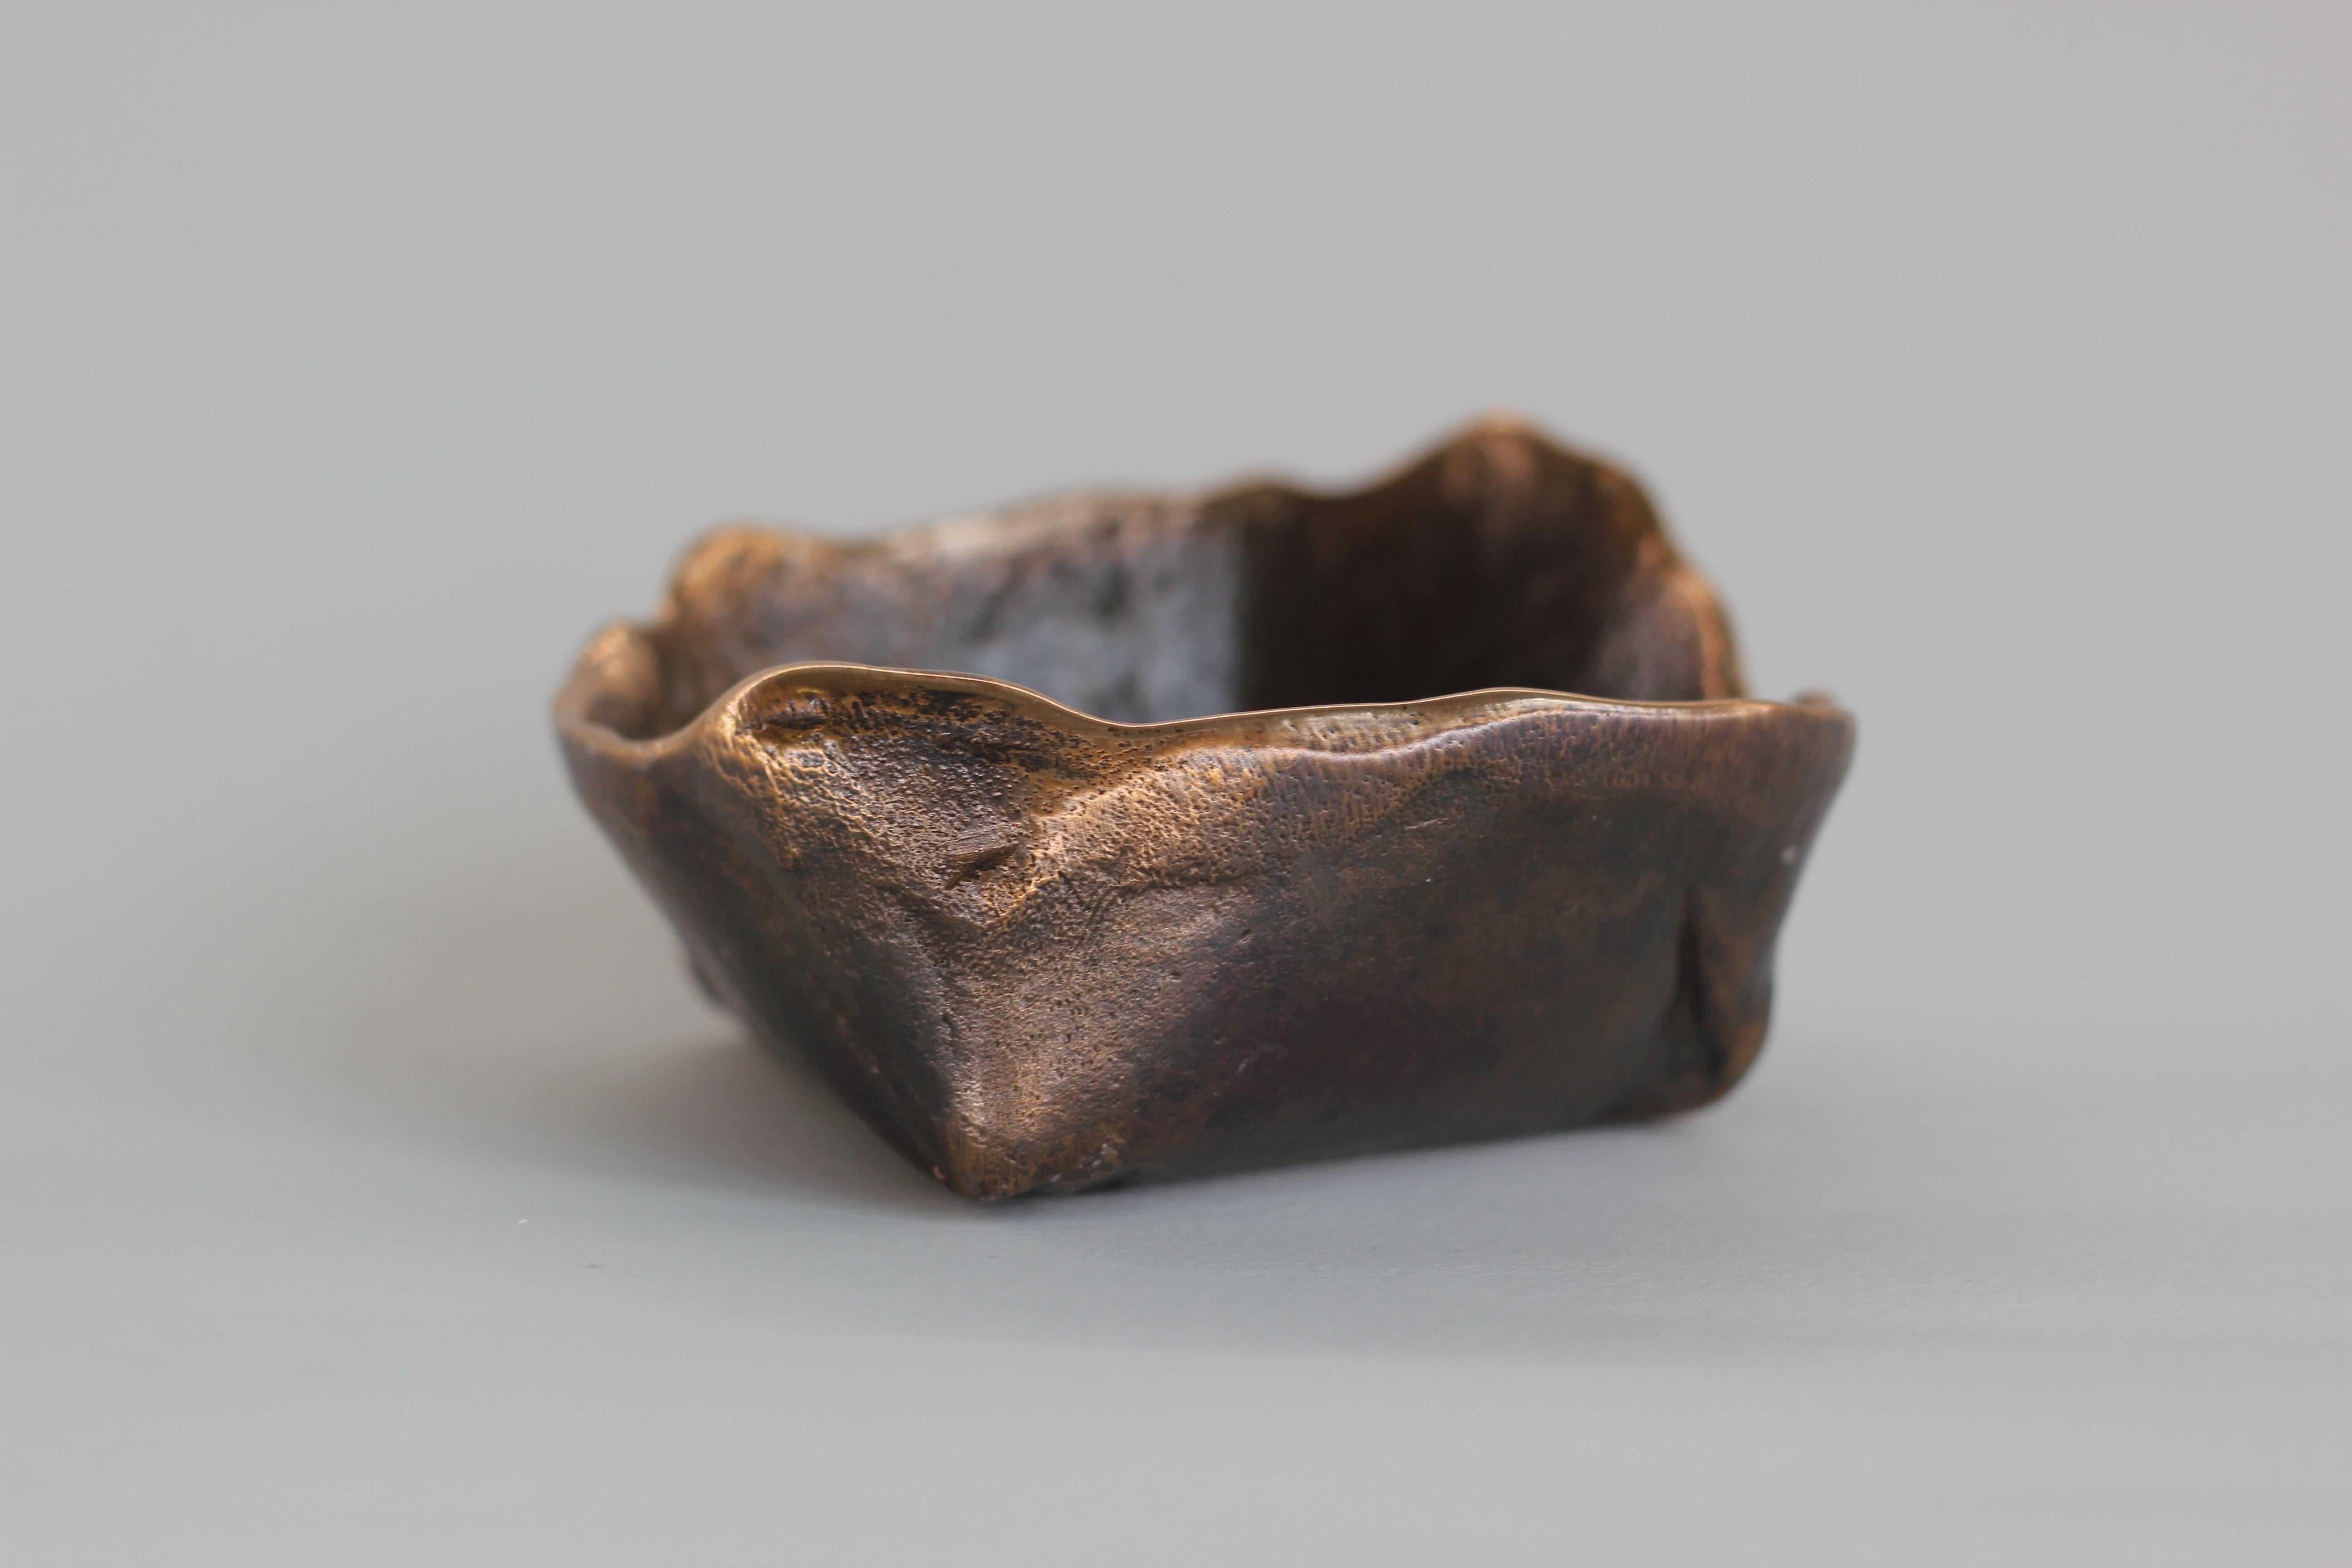 Graceful bronze bowl, vide-poche, inspired by Wabi-Sabi, the ancient Japanese philosophy that views and embraces the world for its imperfections and transient nature. It translates into an exquisite aesthetic that is imperfect and incomplete, yet